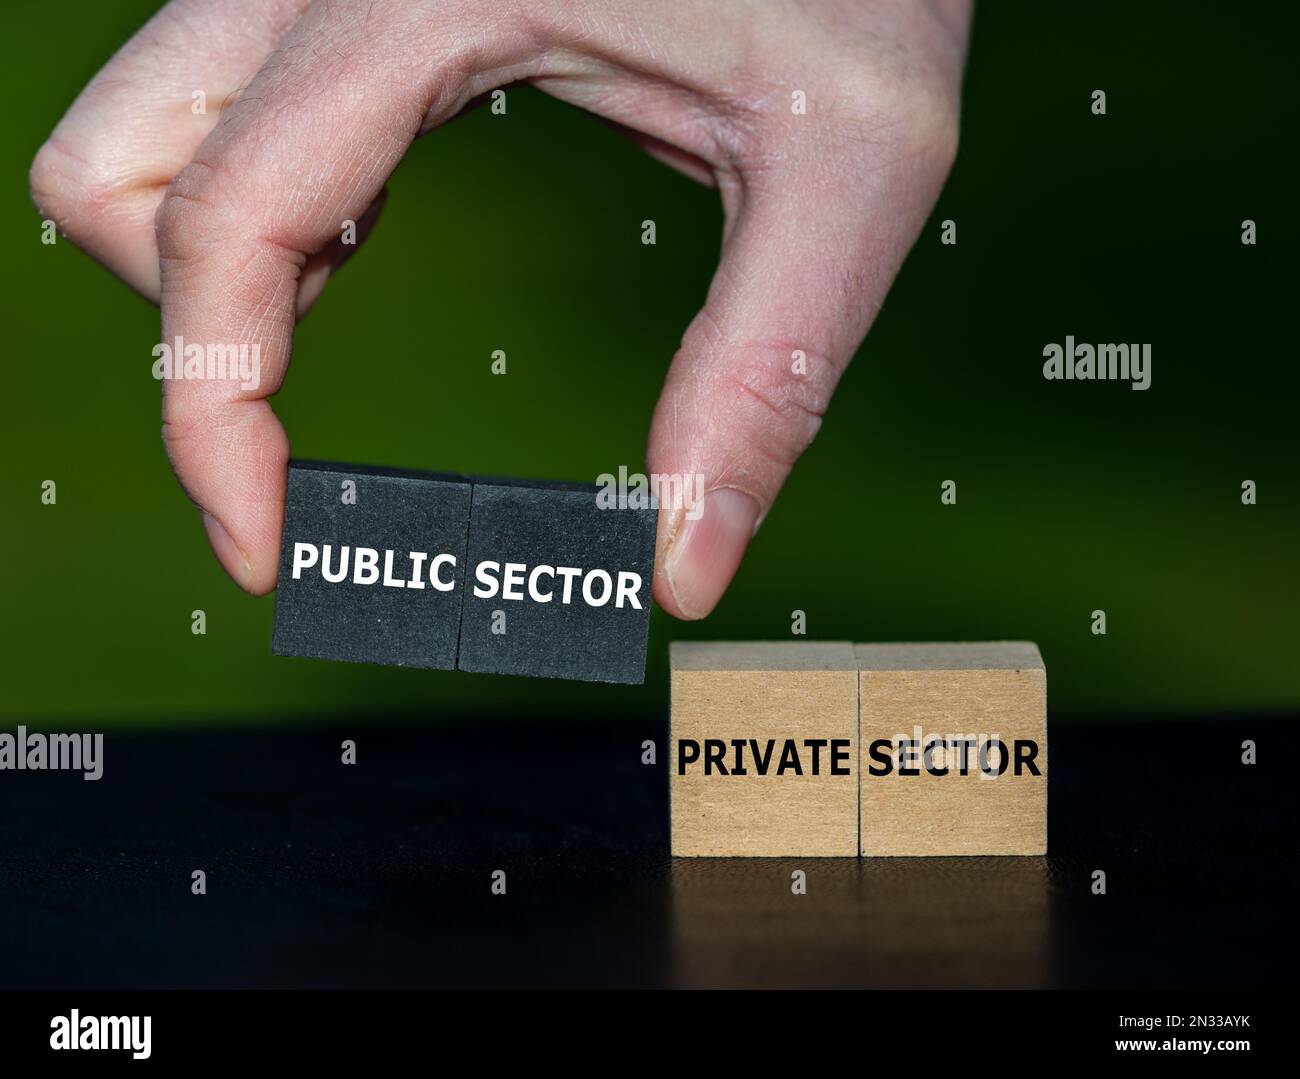 Hand selects cubes with the expression 'public sector' instead of cubes with the text 'private sector'. Stock Photo